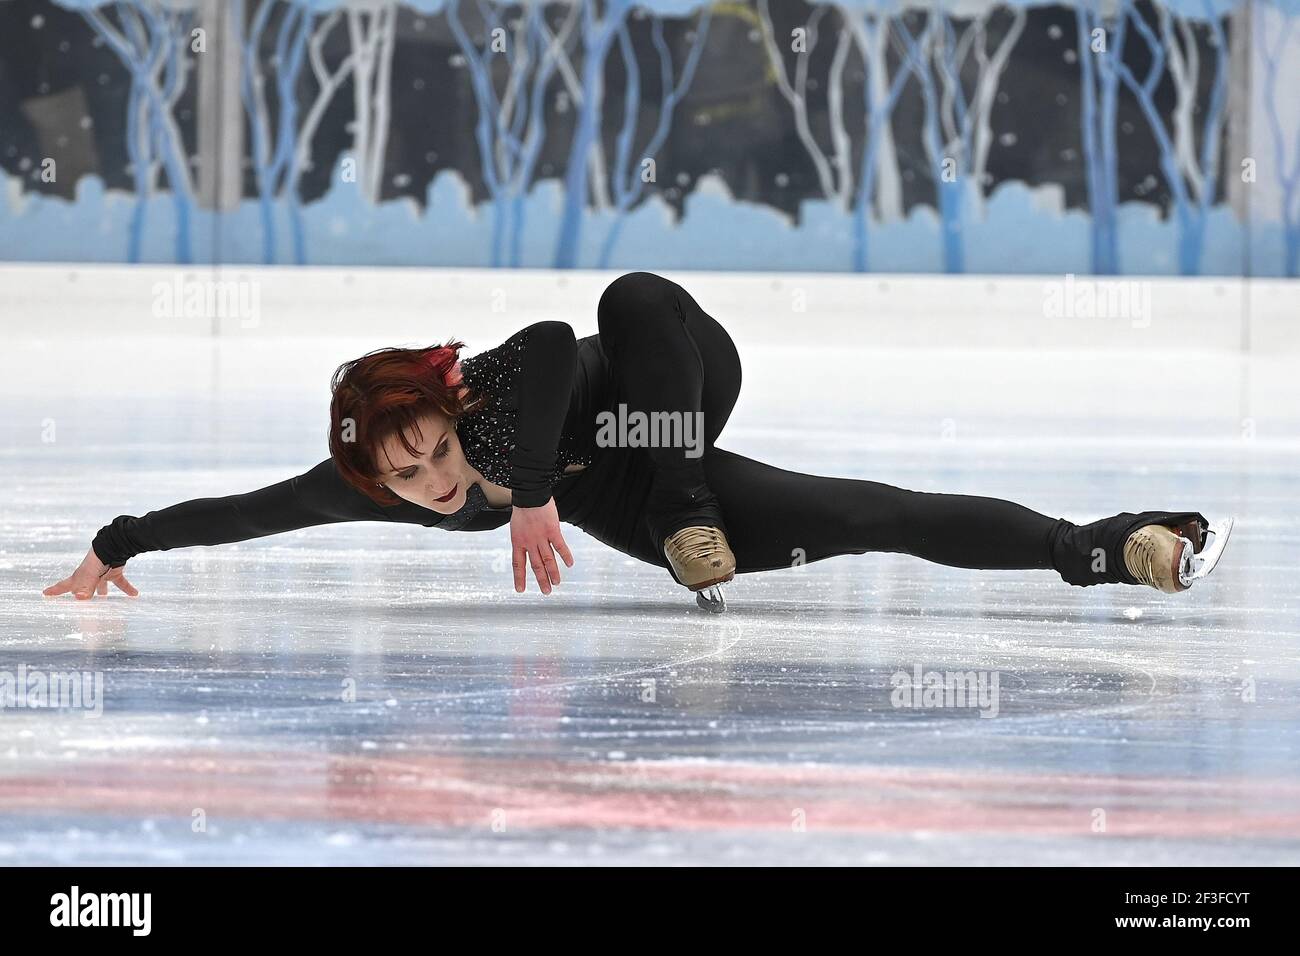 Professional skater Sarah France performs a solo routine during the 2021  City Skate Pop-Up Concert at the Winter Village Bryant Park ice skating rink  in New York, NY, March 16, 2021. (Photo